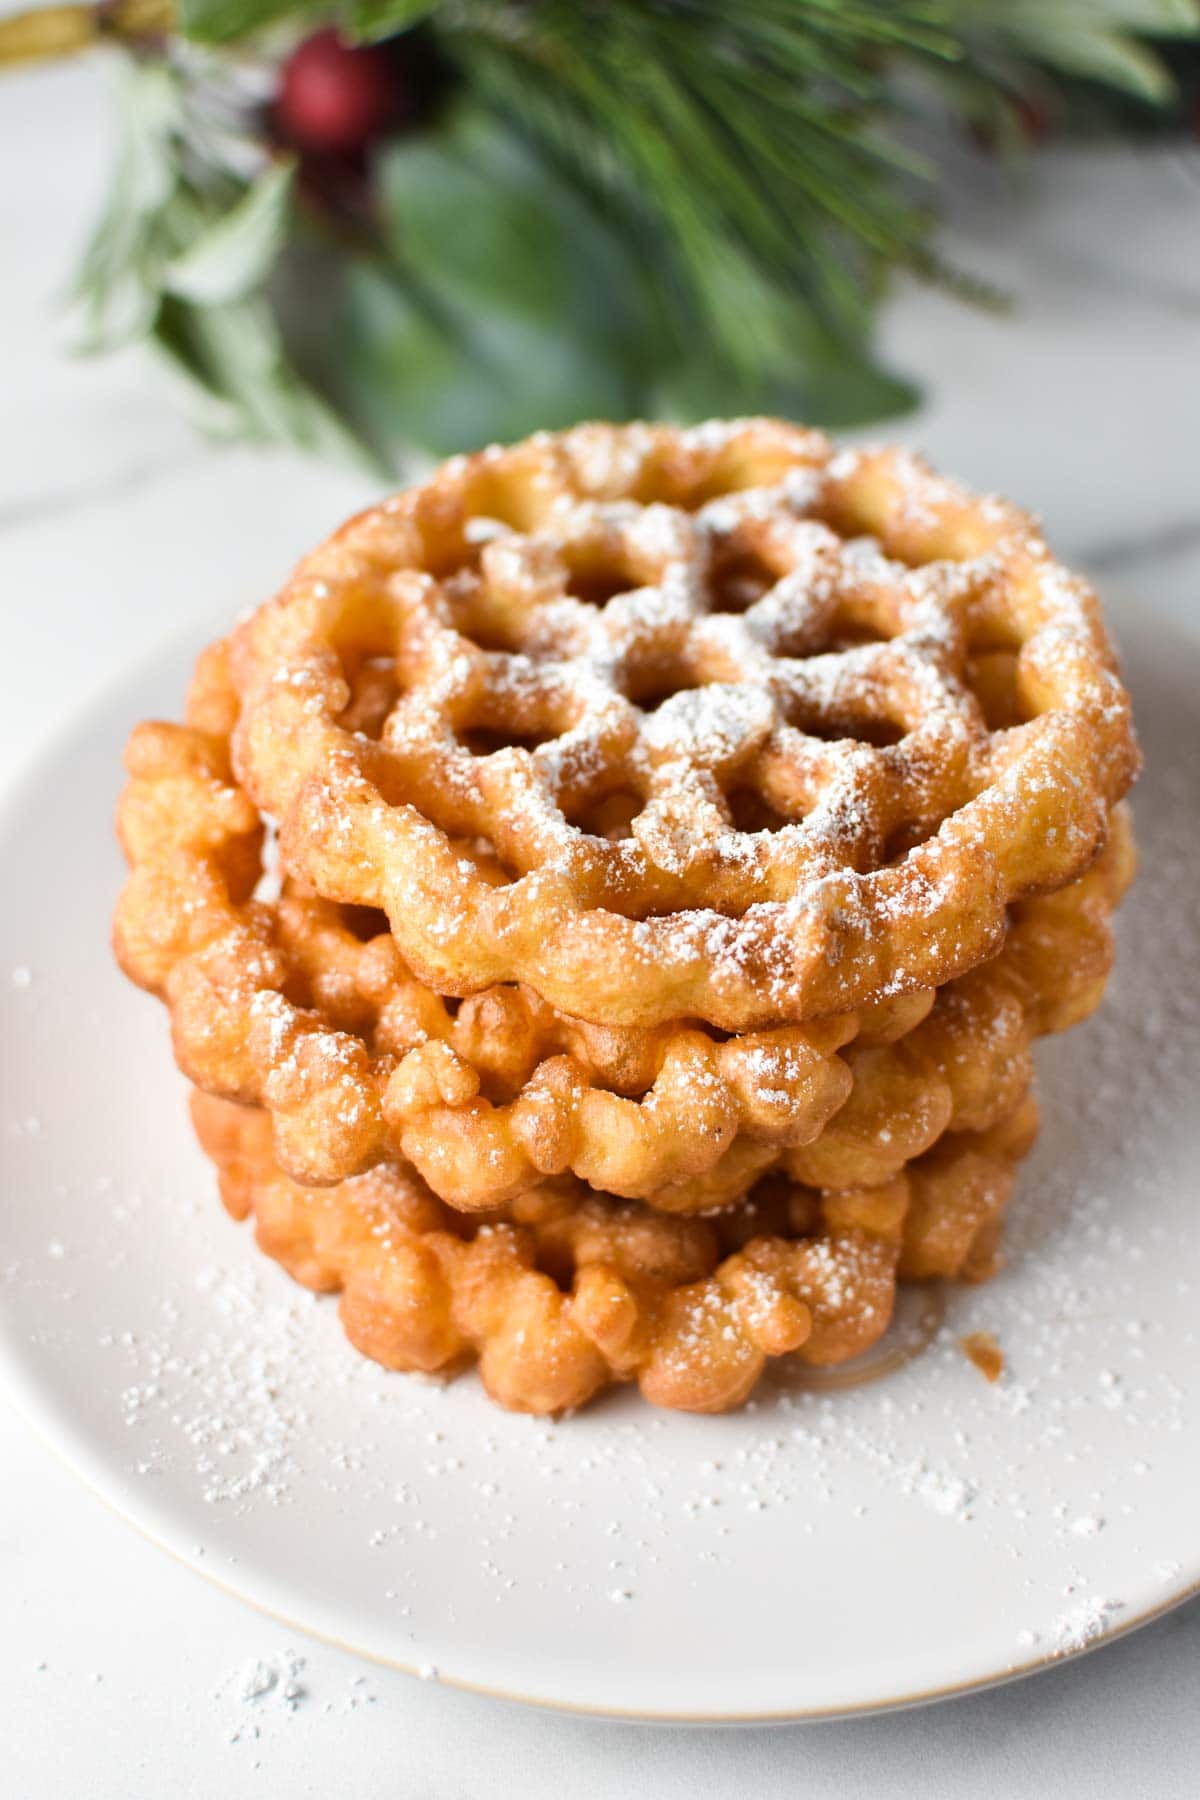 A stack of fried cookies in a snowflake pattern